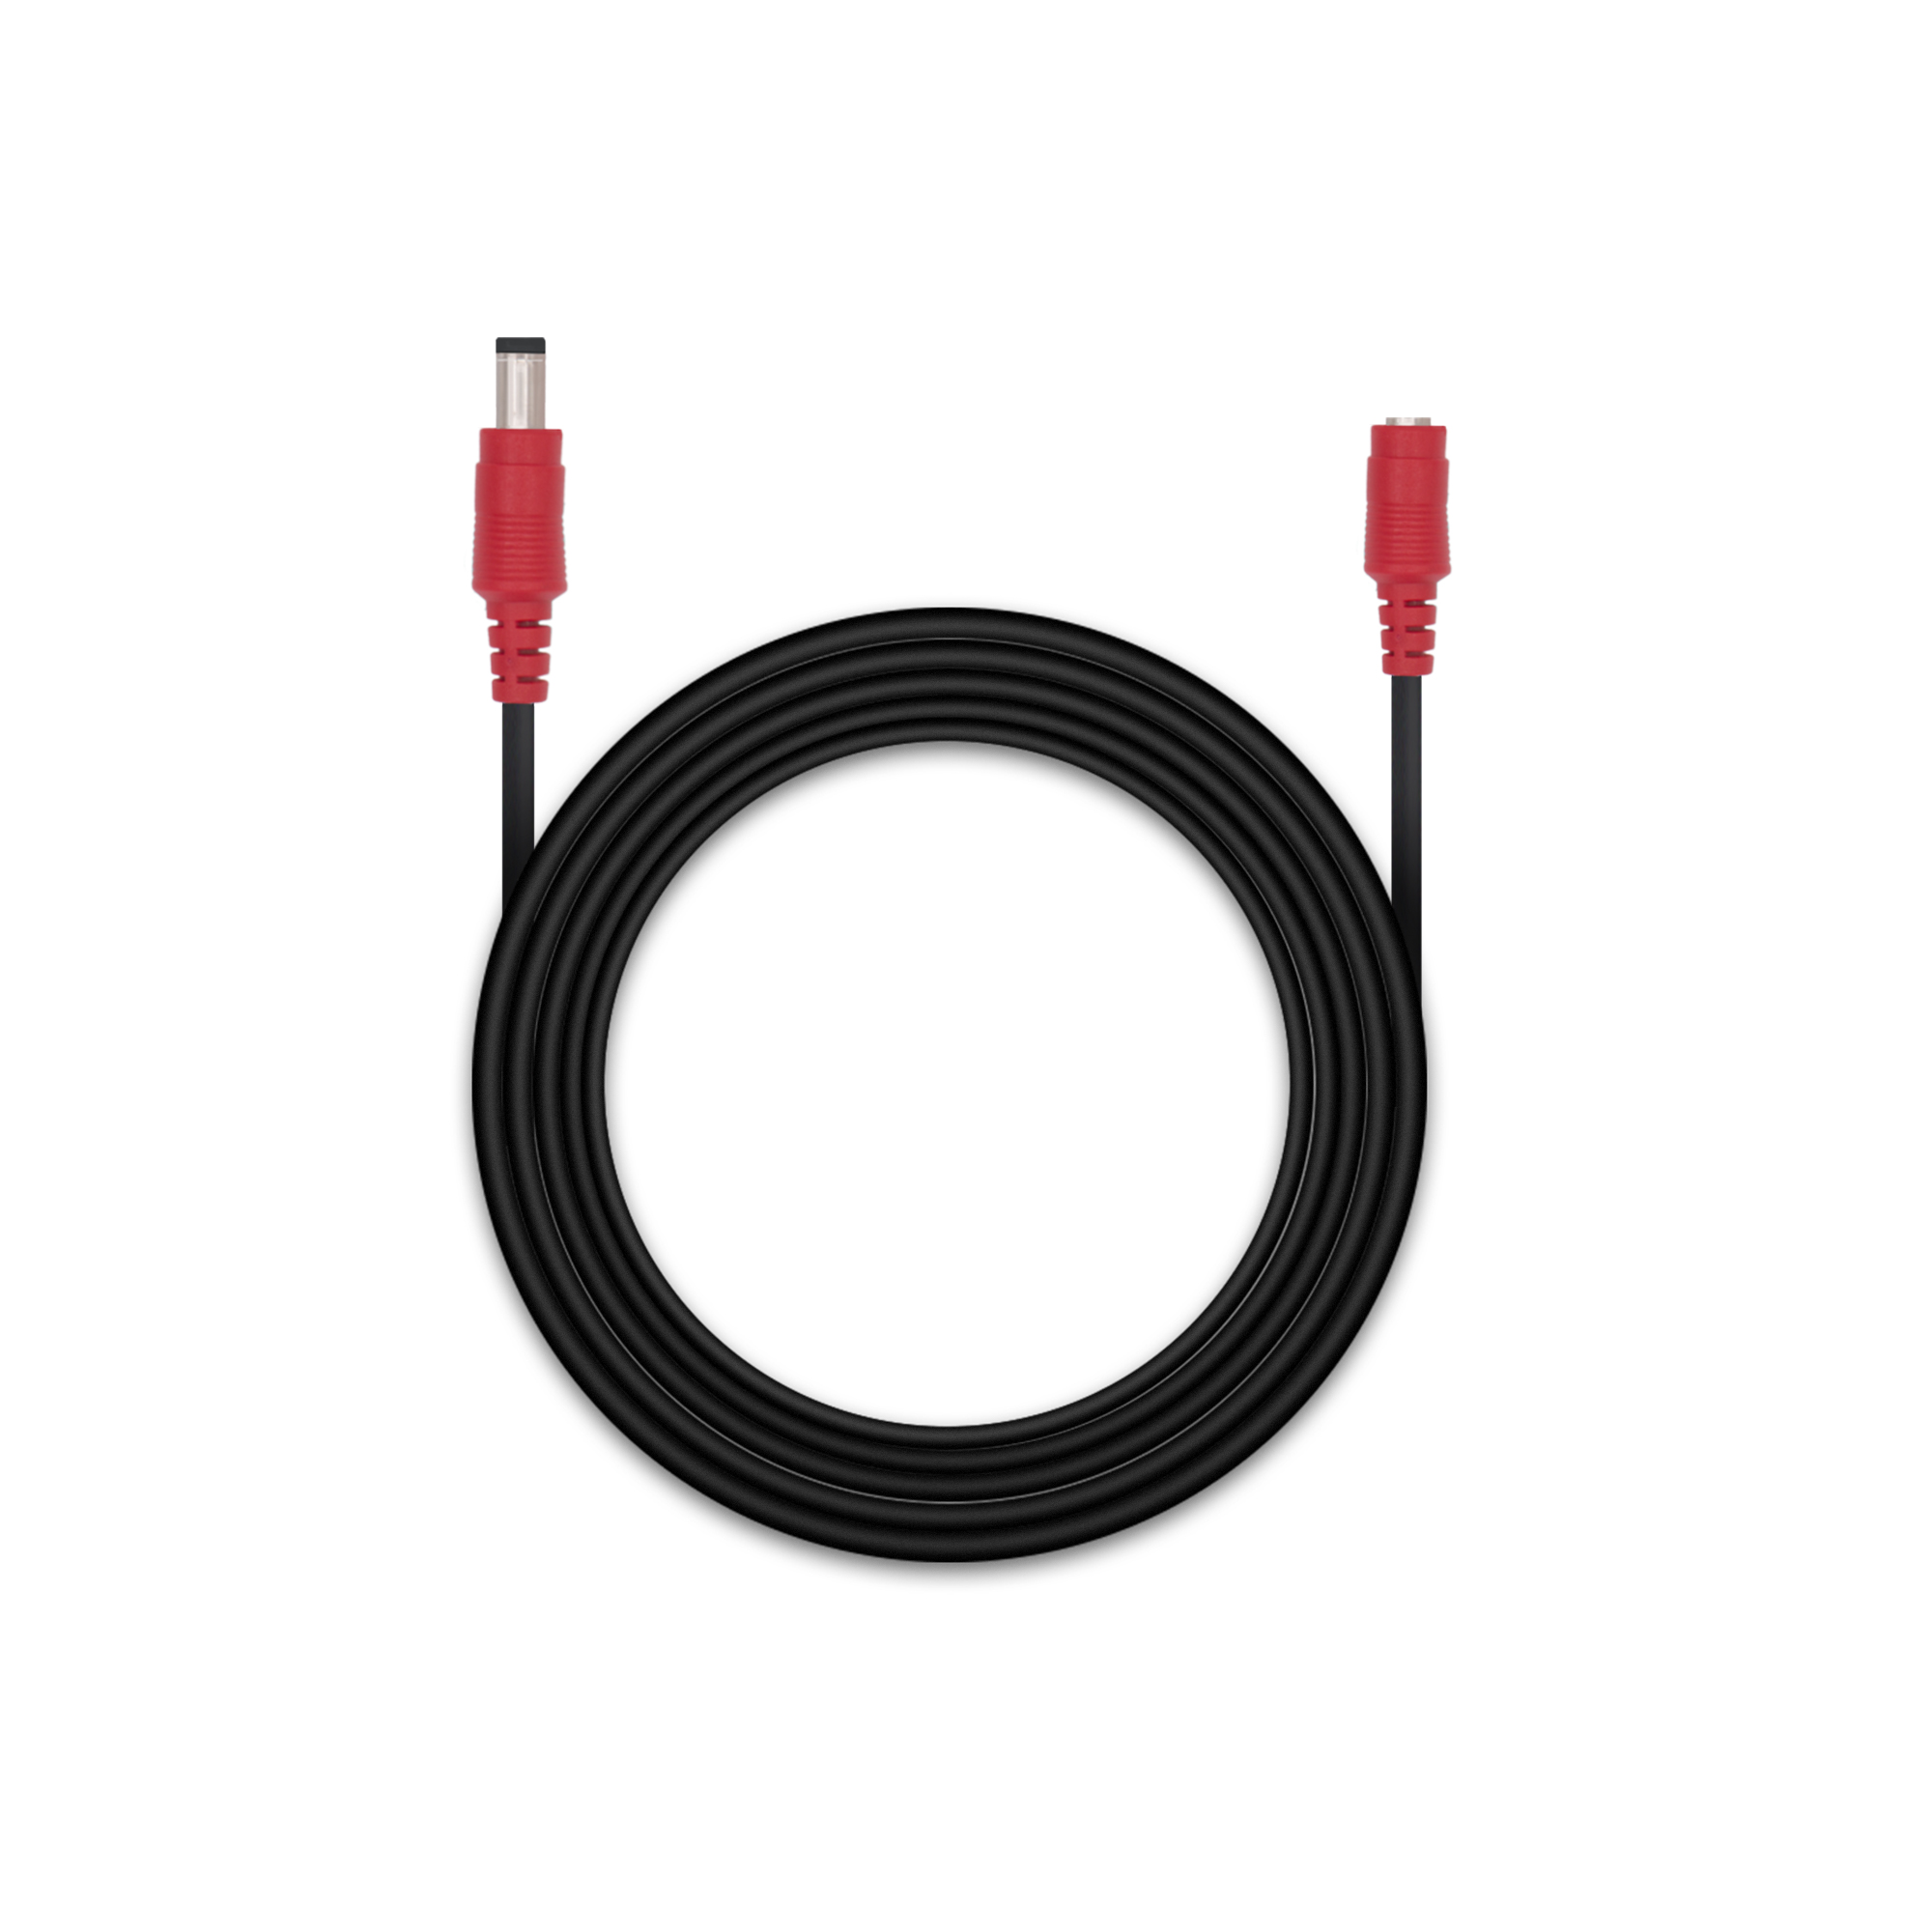 4.5M Power Extension Cable